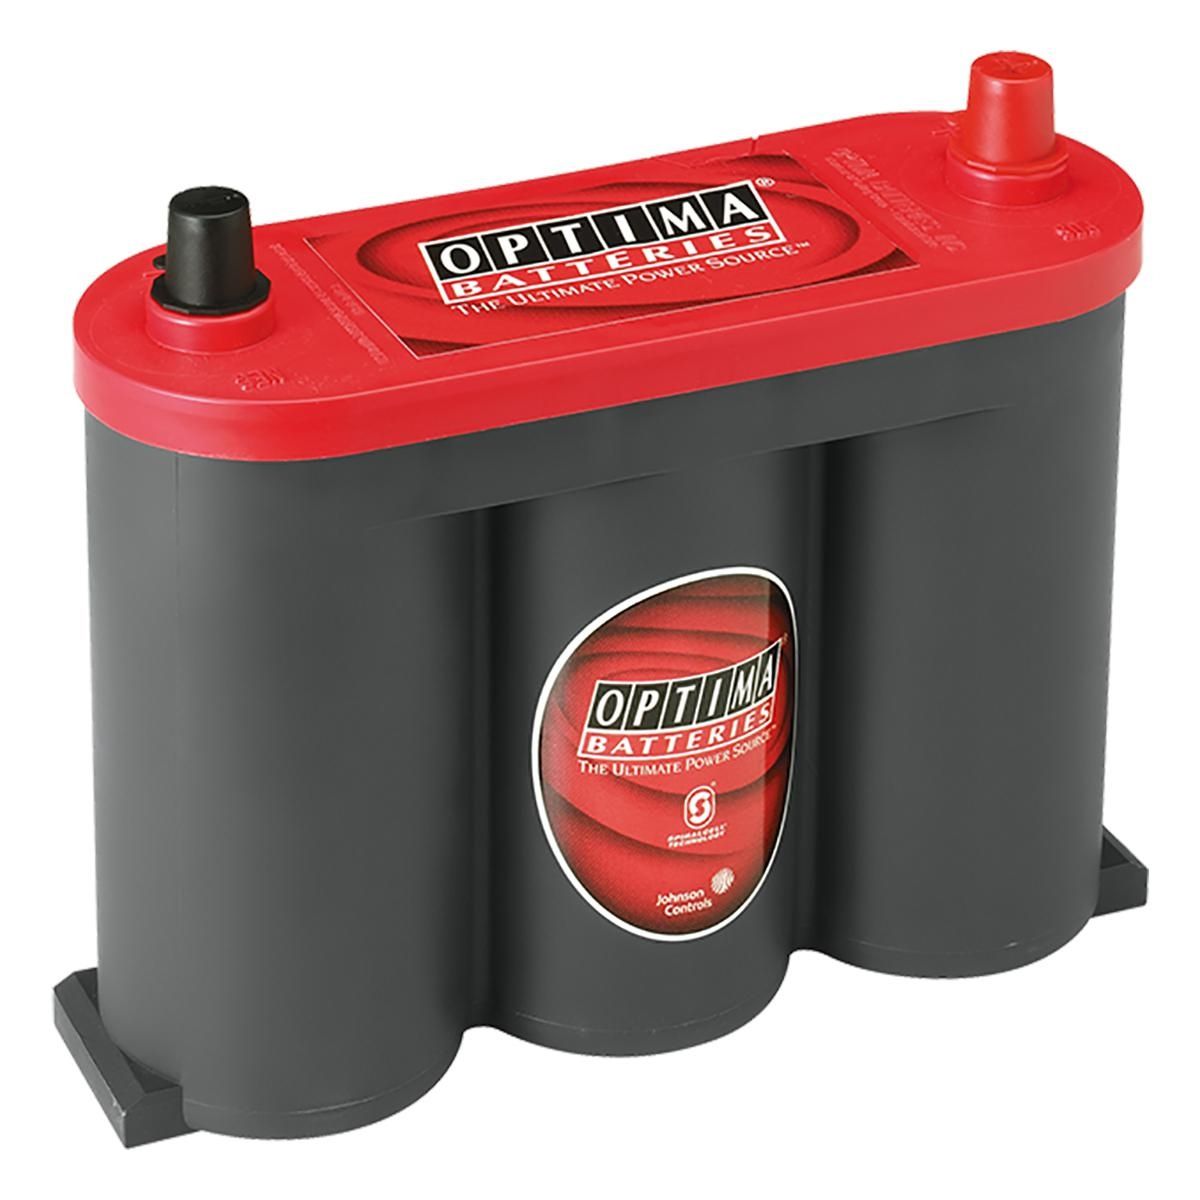 Optima Red Battery Review